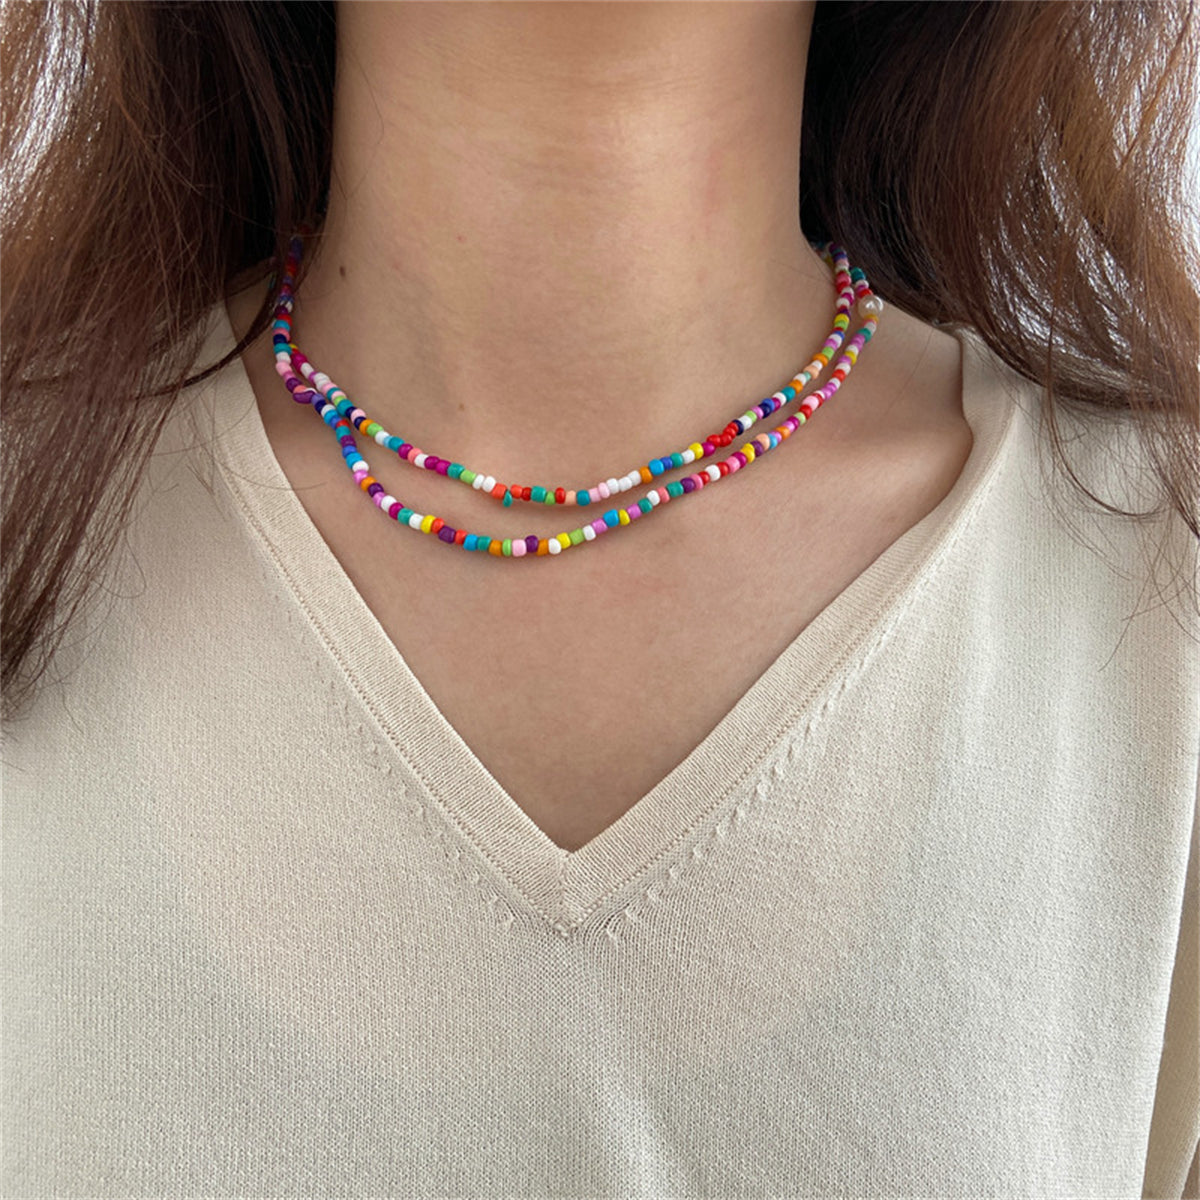 Multicolor Howlite & Silver-Plated Beaded Necklace